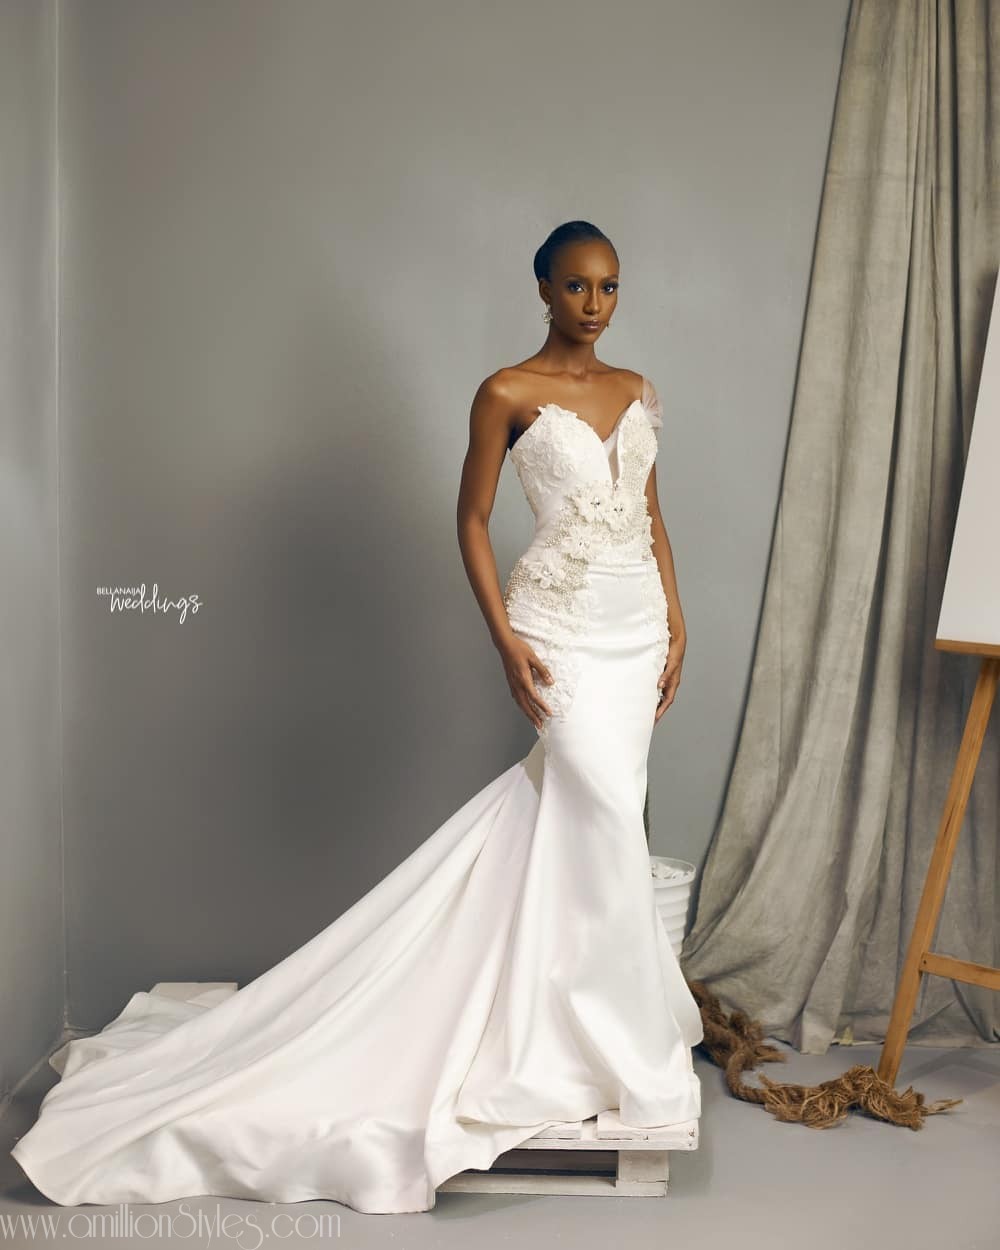 Which Of These Wedding Gowns By Tubo Would You Wear?